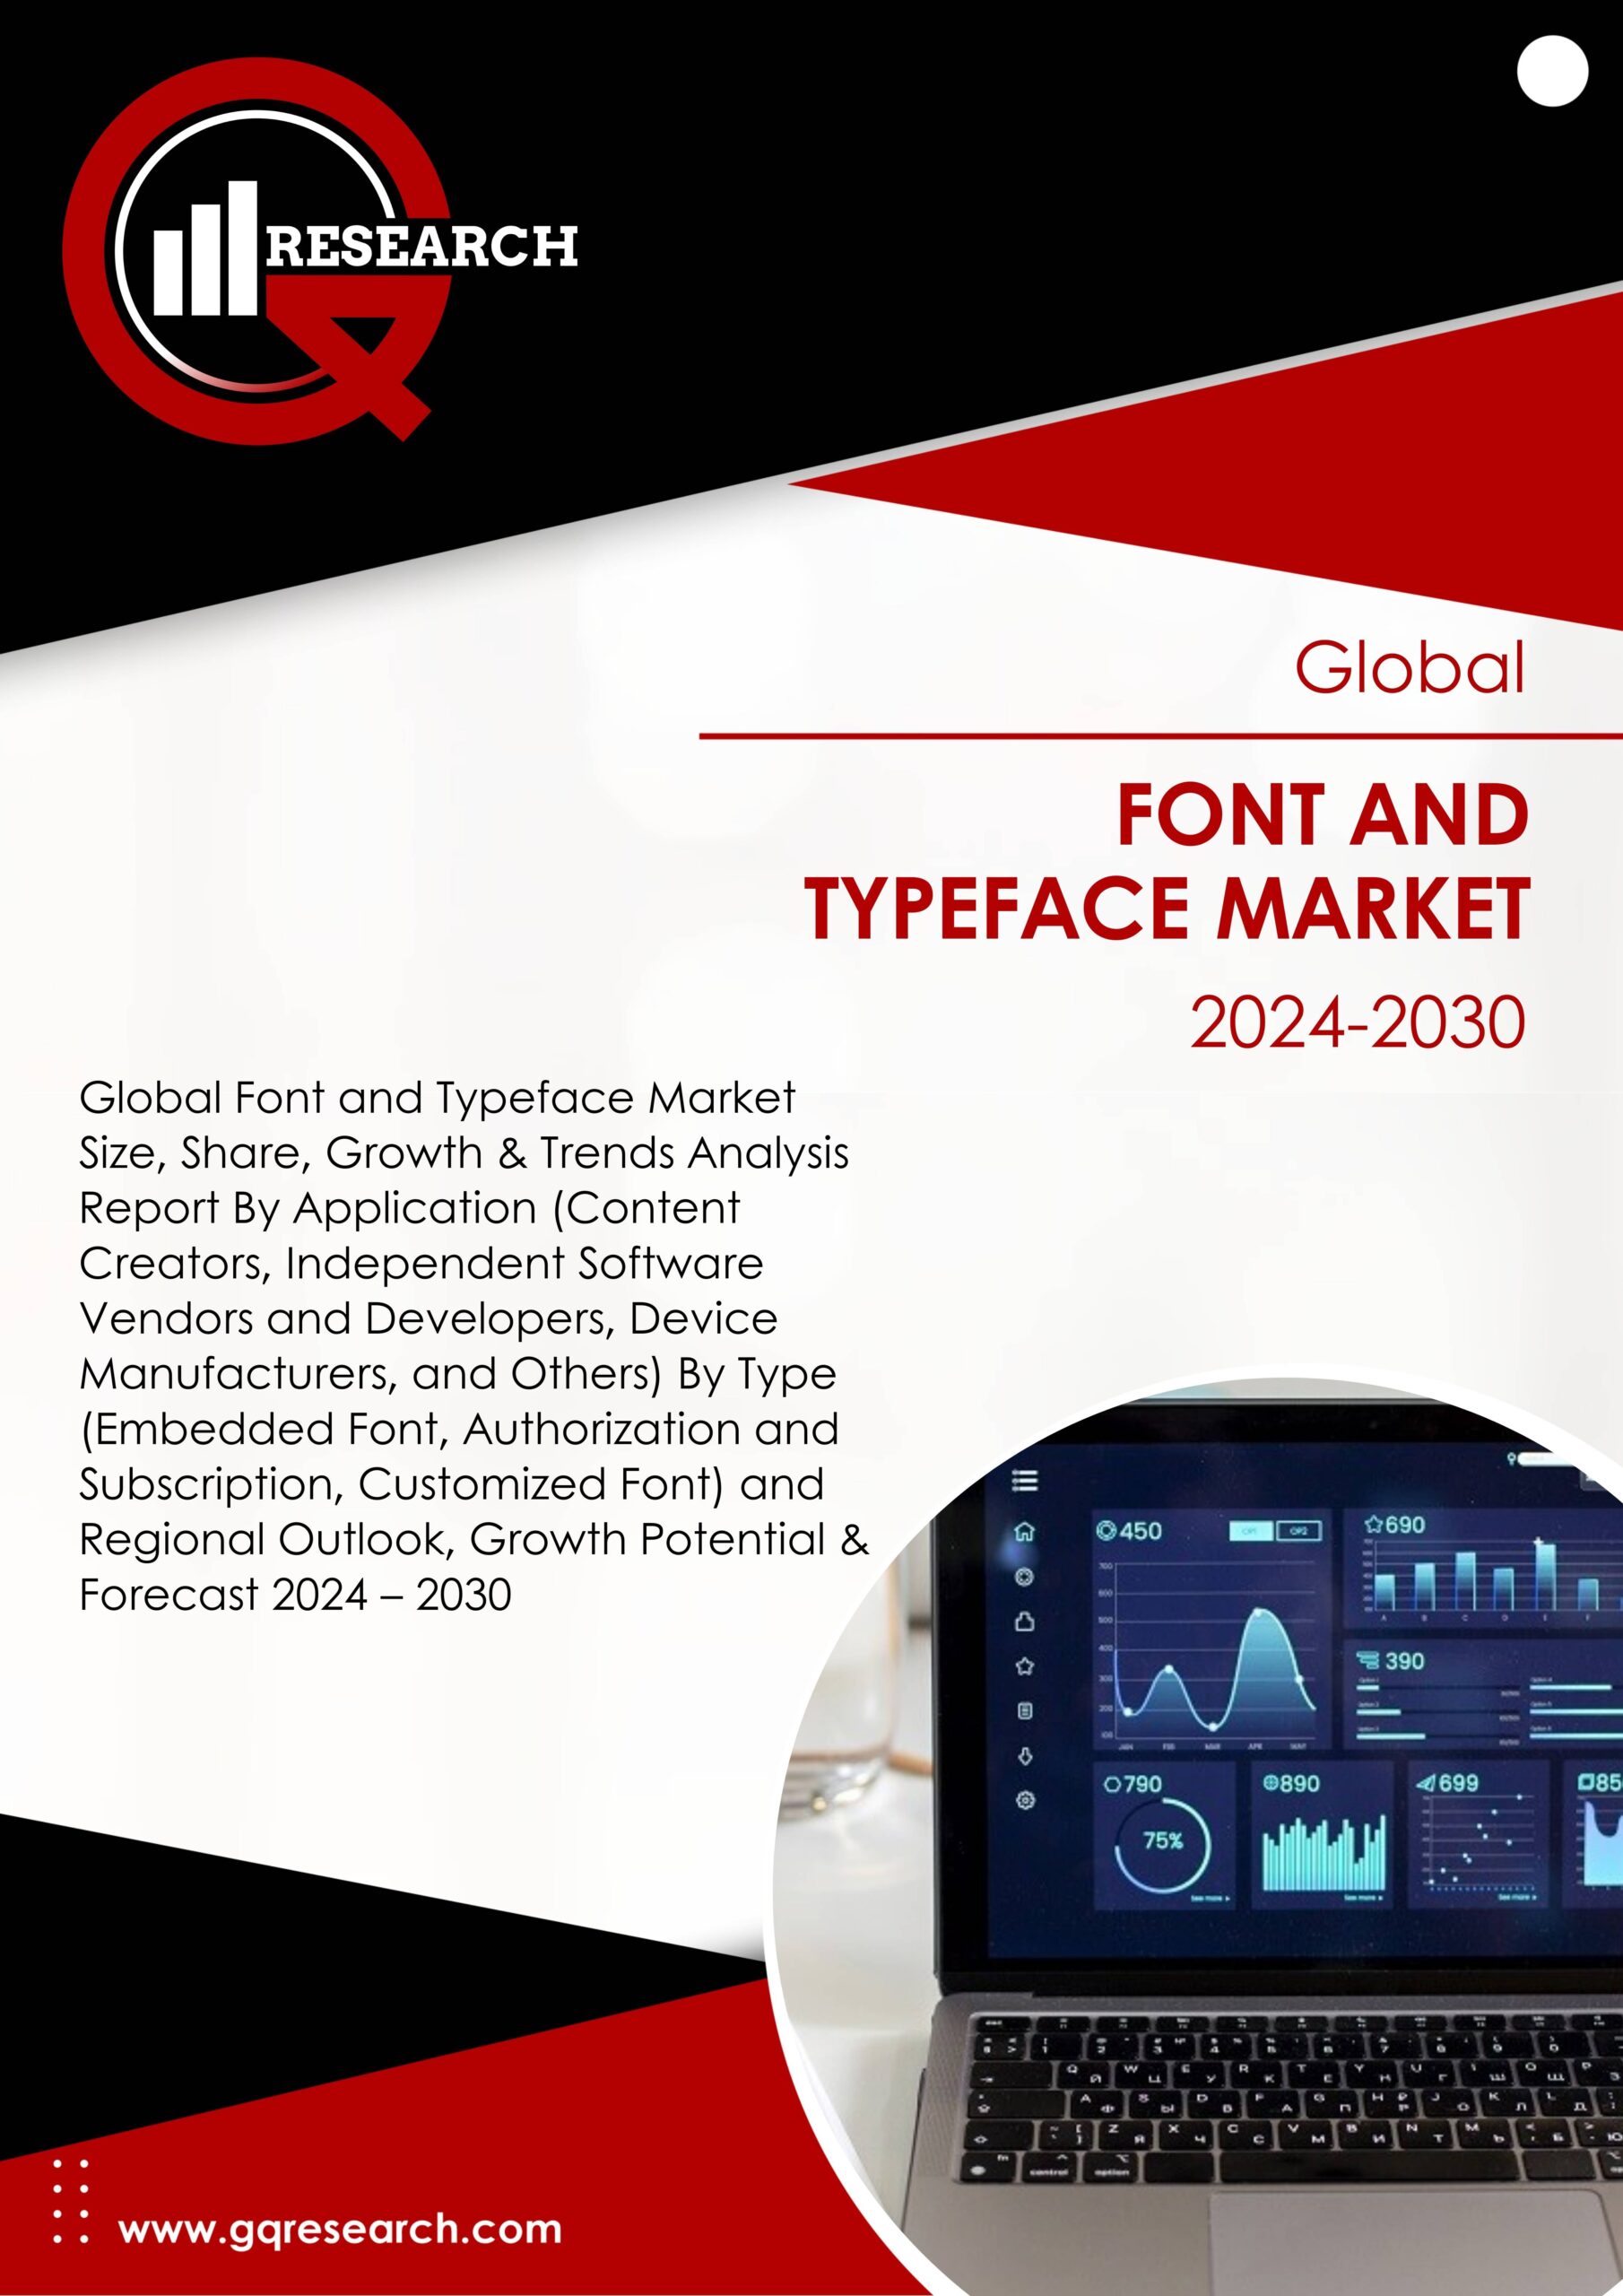 Font and Typeface Market Size, Share, Growth and Forecast to 2030 | GQ Research